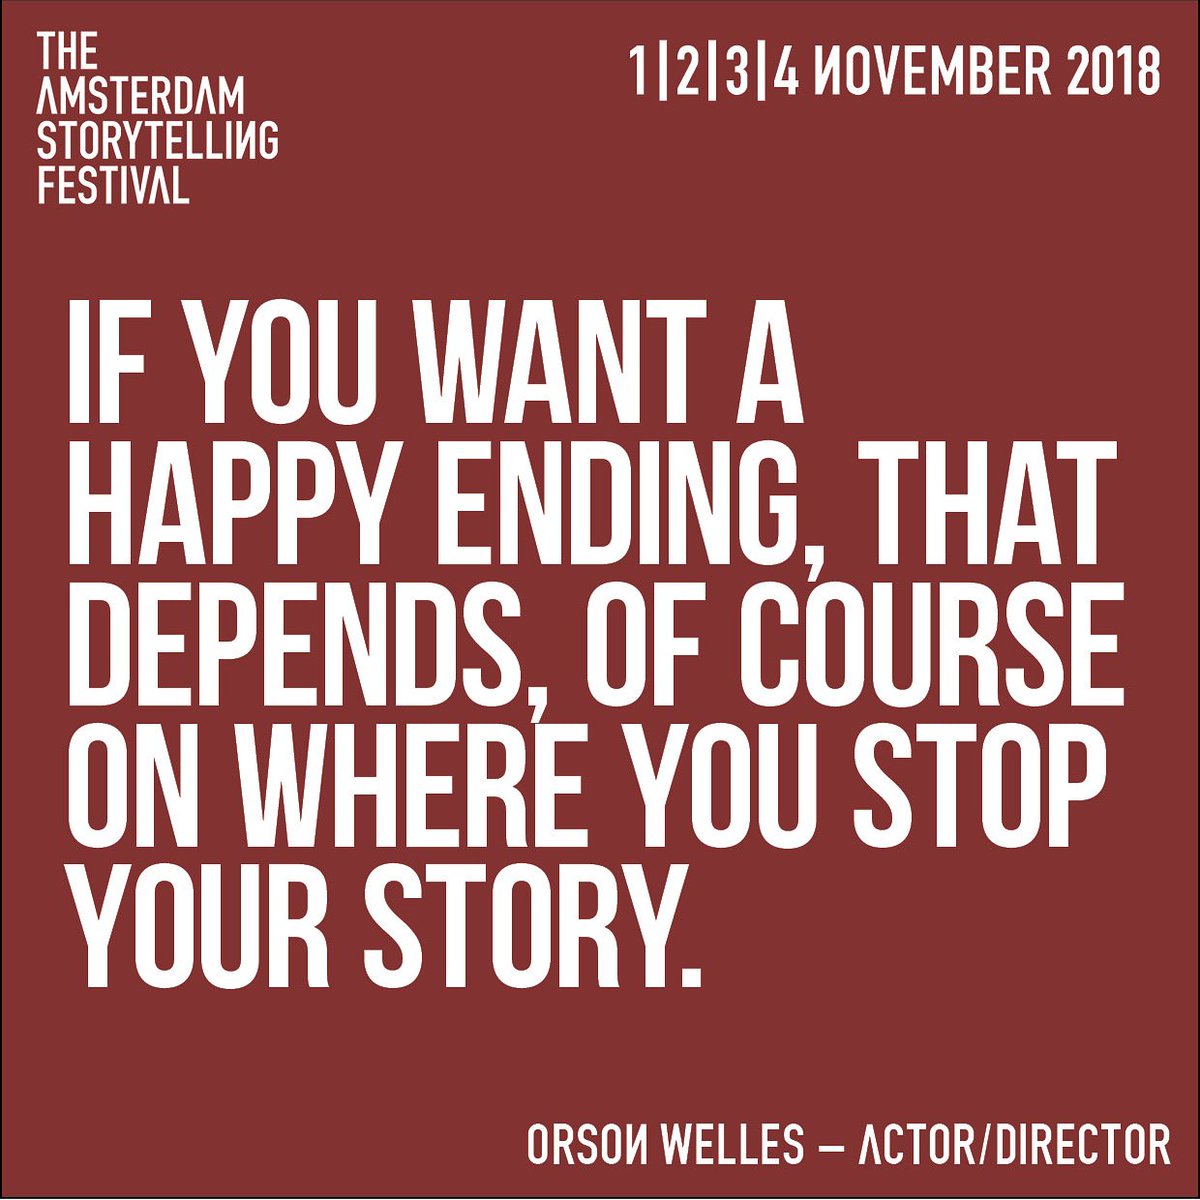 We don't know when we stop, but we start today! 
#storytellingfestival2018 #storytelling #festival #storyteller #Amsterdam #stories #storytime #story #ihaveastorytotell #igers #igersamsterdam #tale  #mezrab #mozaiek #comeandlisten #ihavestoriestotell #festival #stories #amsterdam